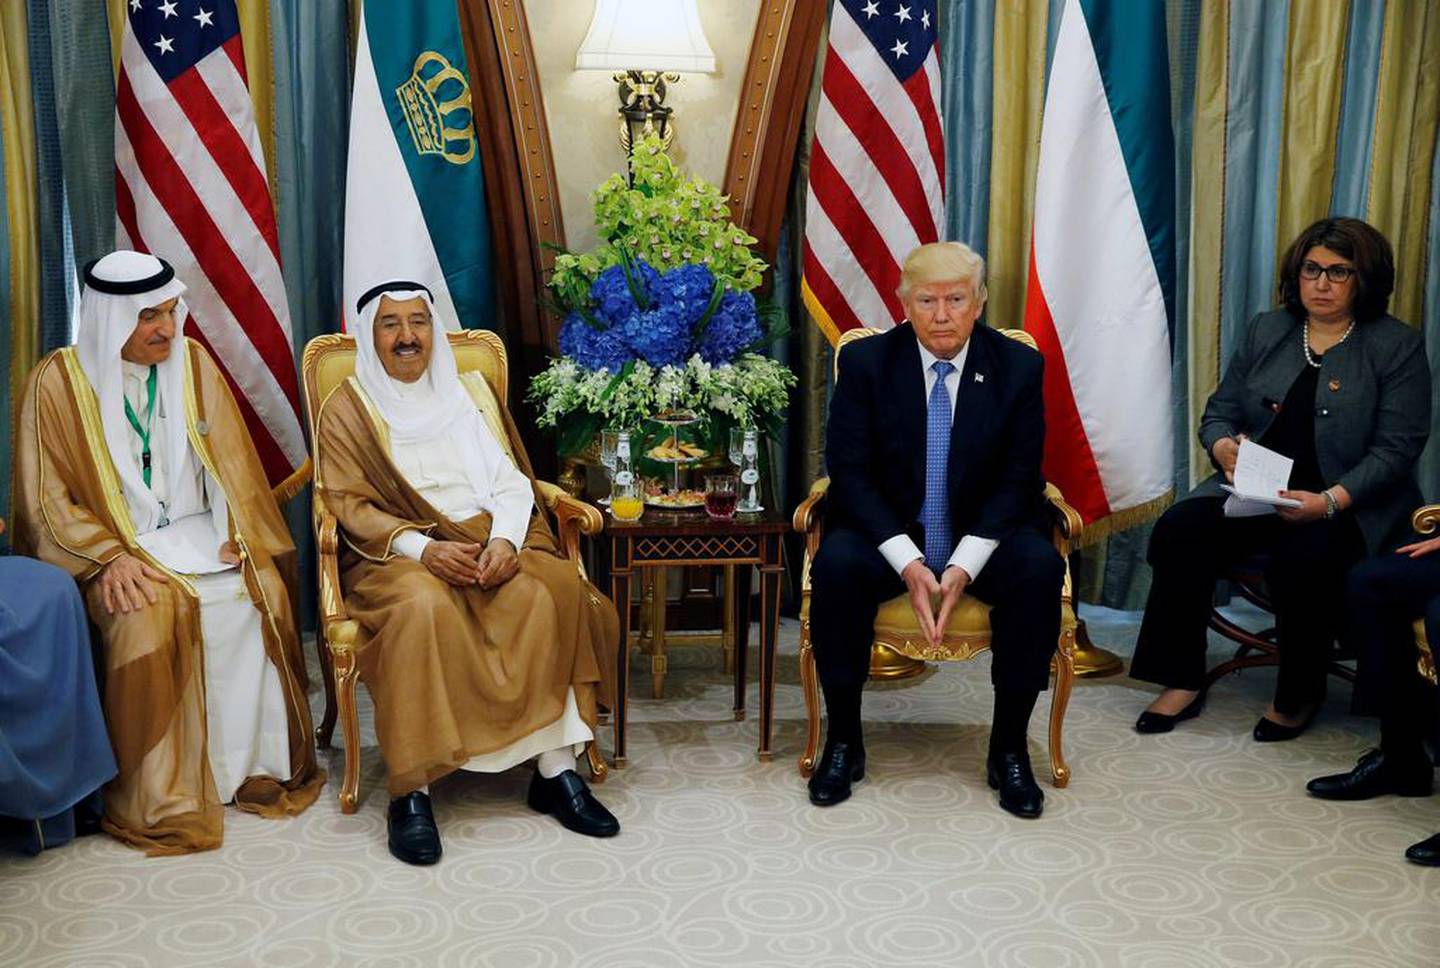 Sheikh Sabah, the emir of Kuwait visited US president Donald Trump last year to discuss the Qatar crisis. Jonathan Ernst / Reuters